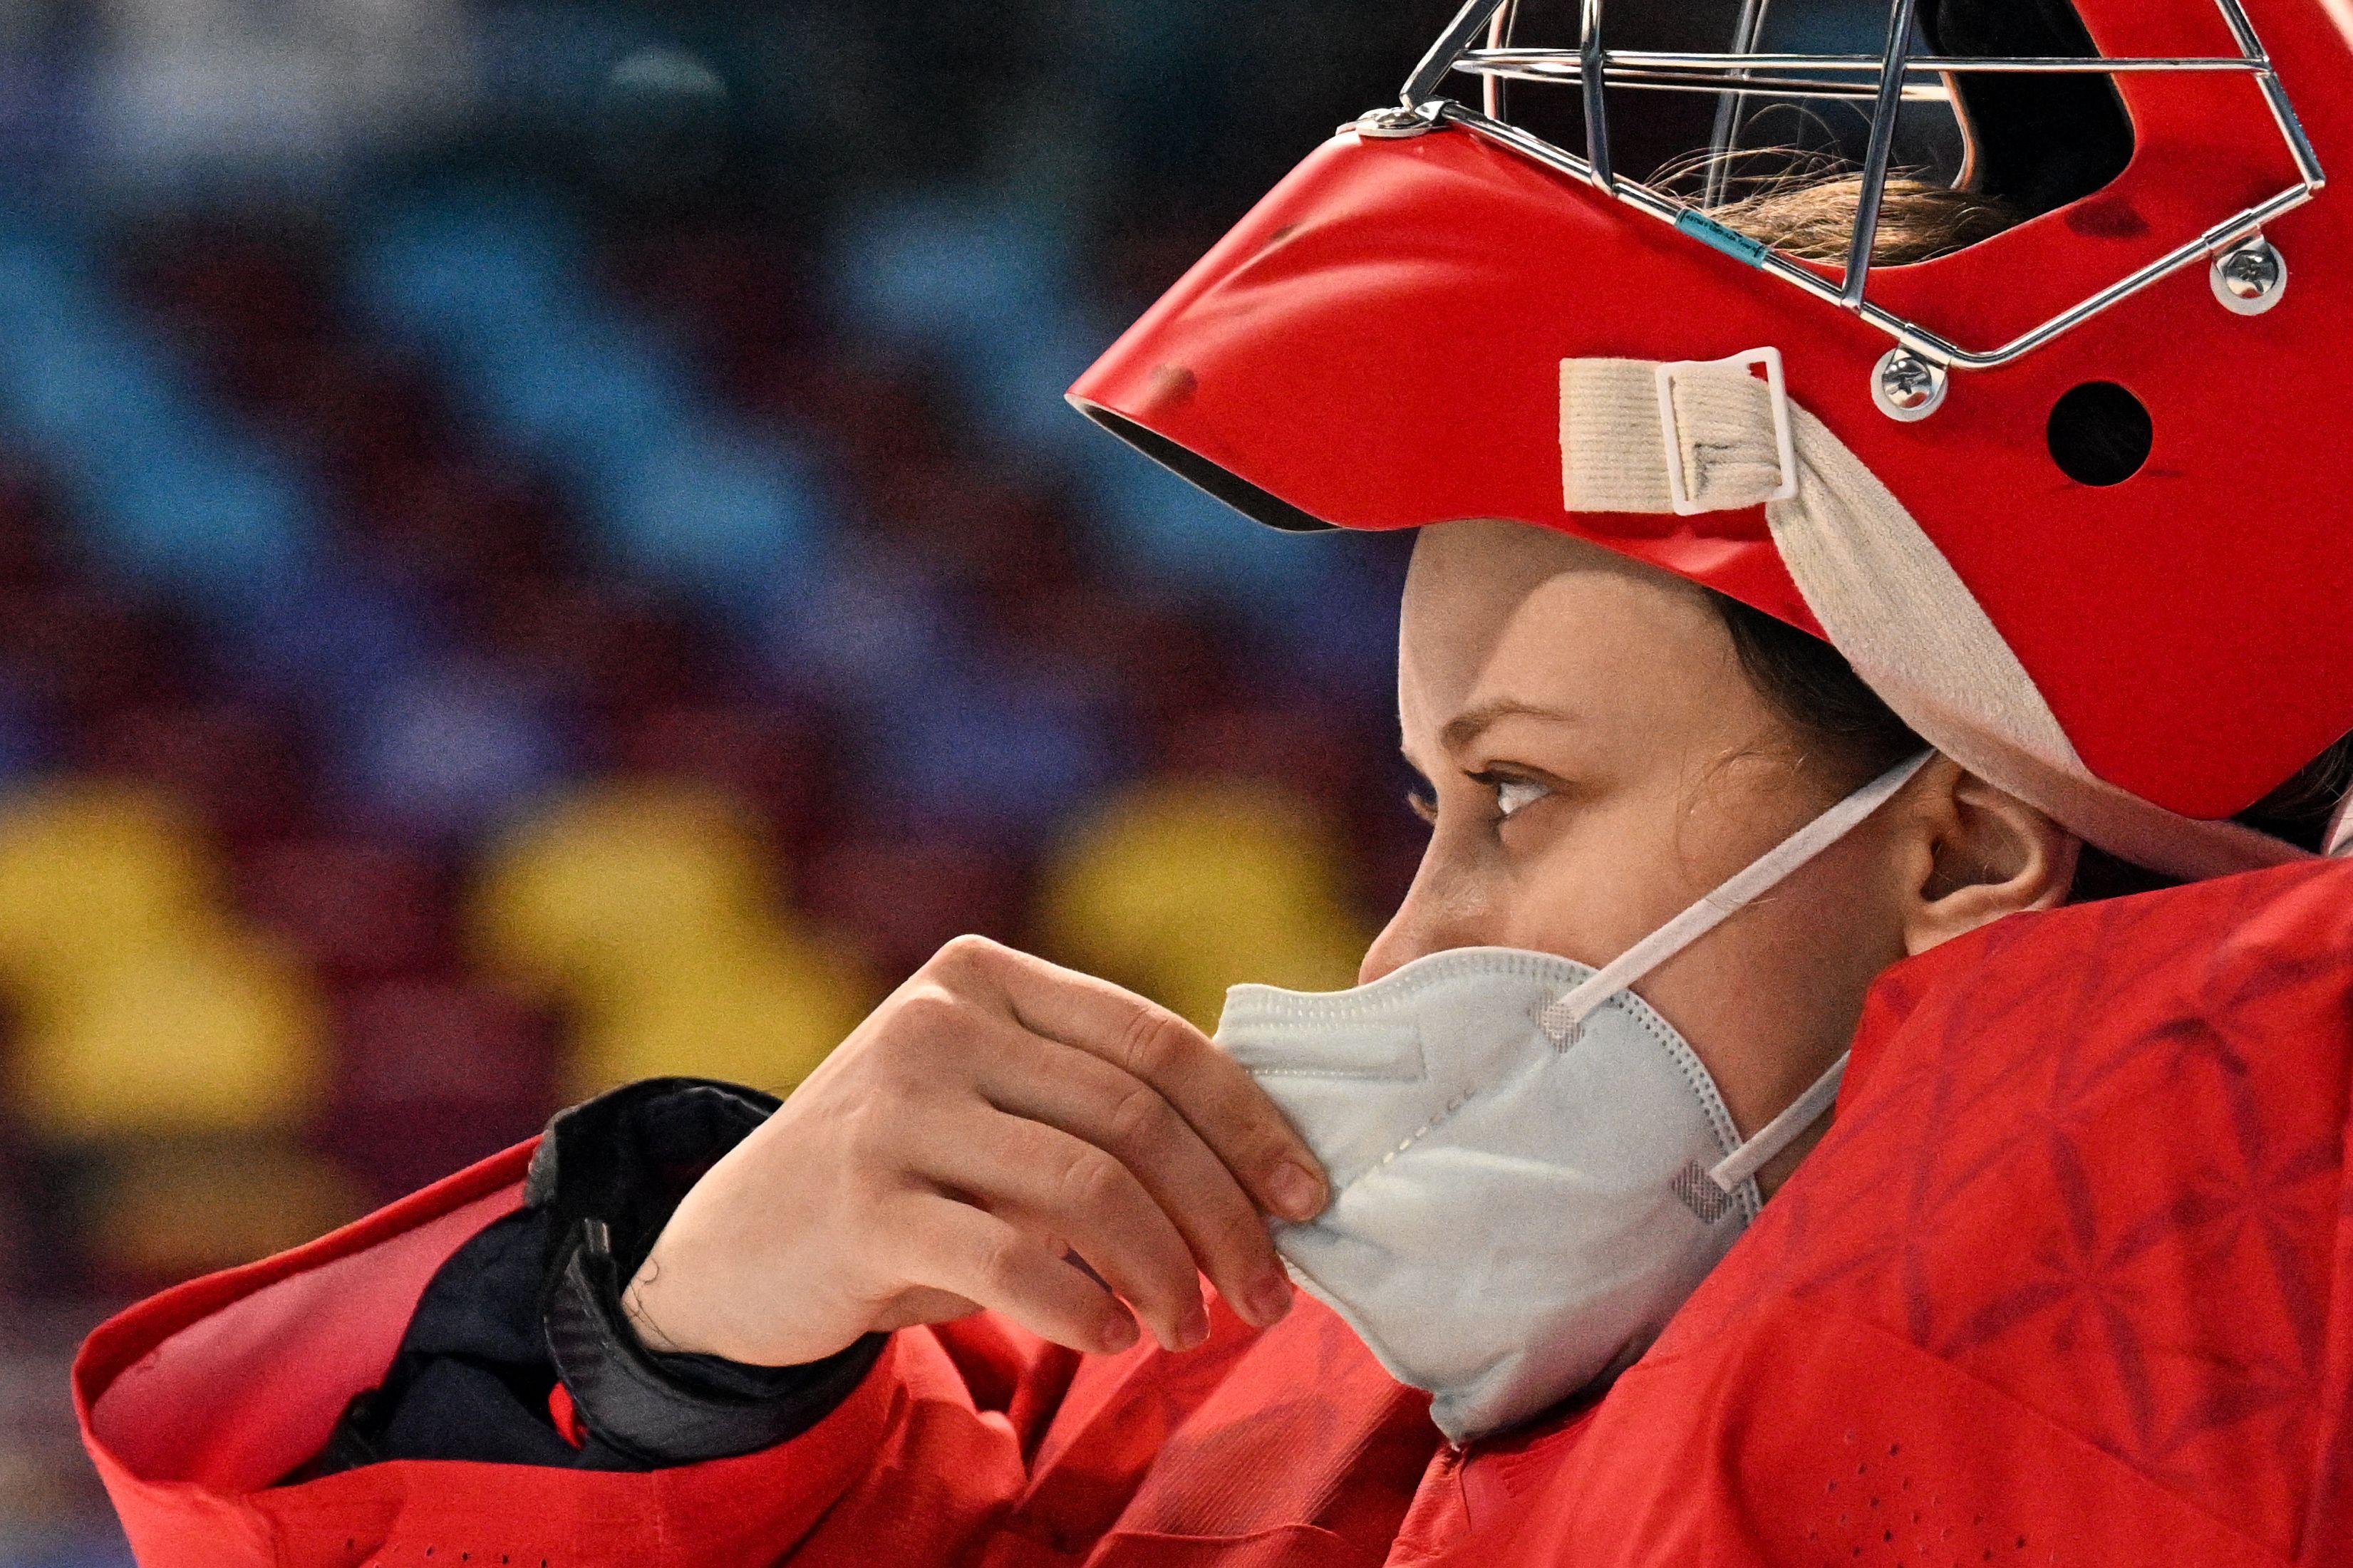 Russian Olympic Committee's goaltender Mariia Sorokina checks her face mask during a women's group A match at the Beijing 2022 Winter Games at the Wukesong Sports Centre on February 7.